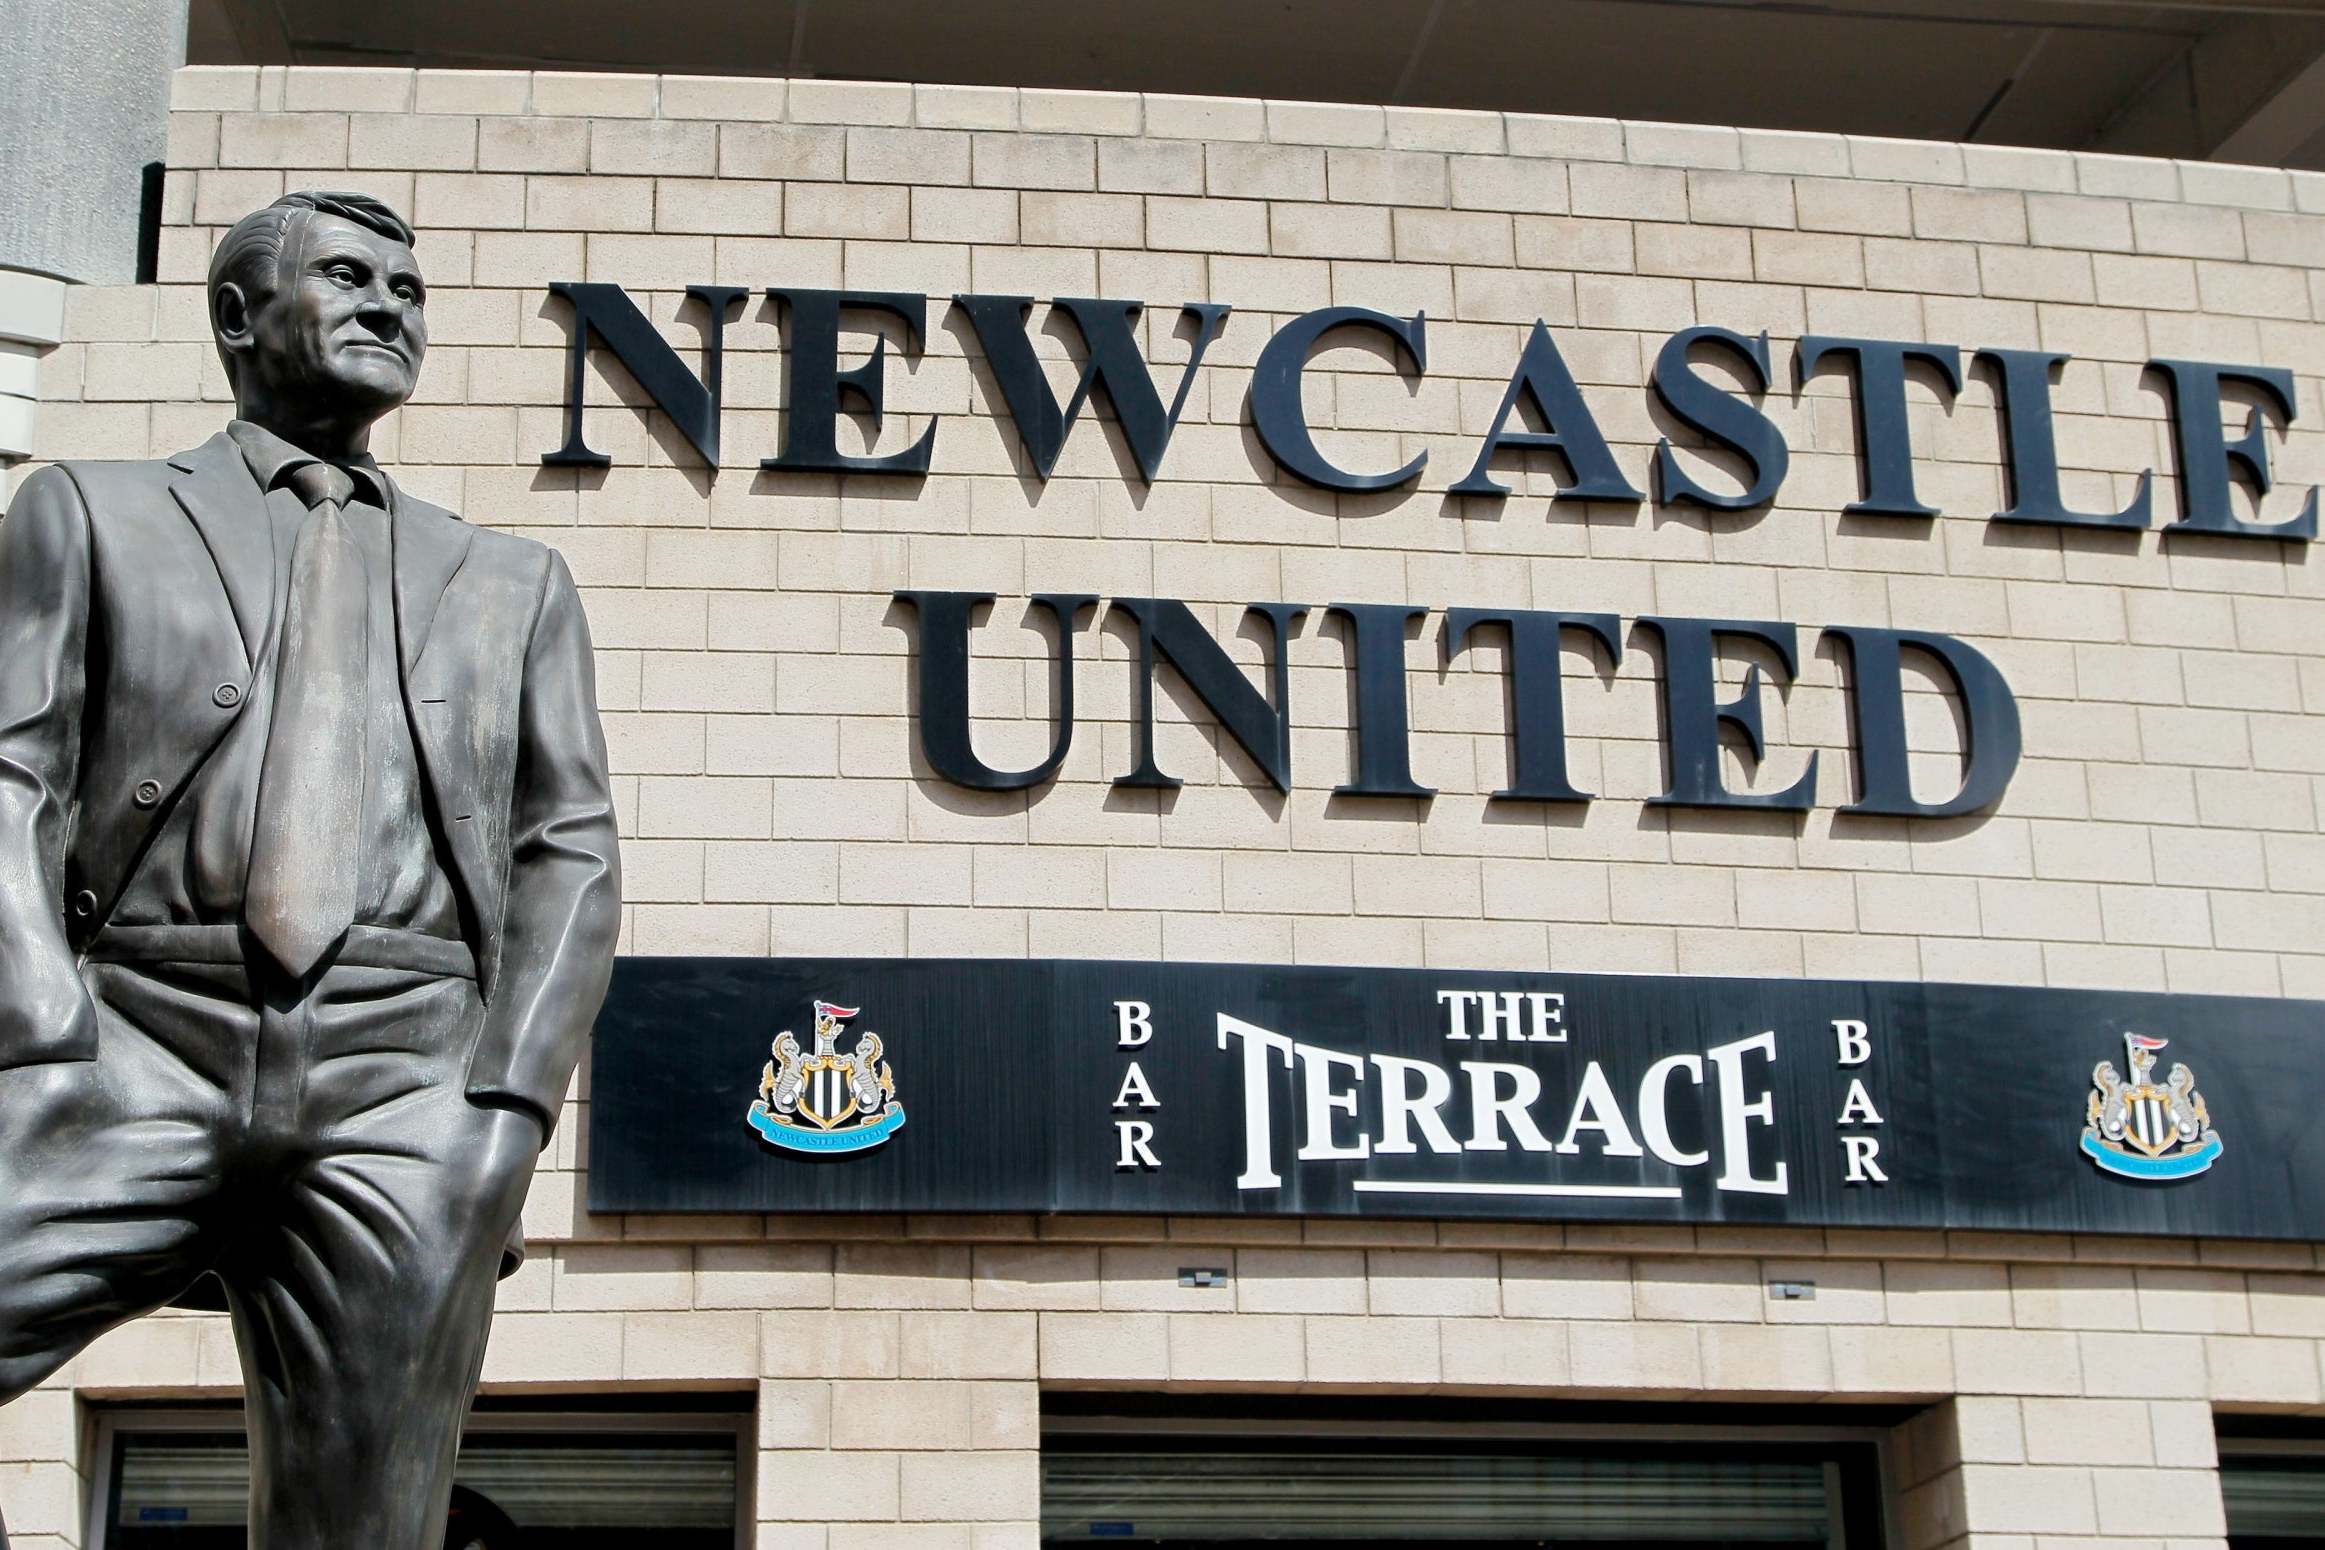 Newcastle United are under a takeover attempt by a Saudi-backed consortium